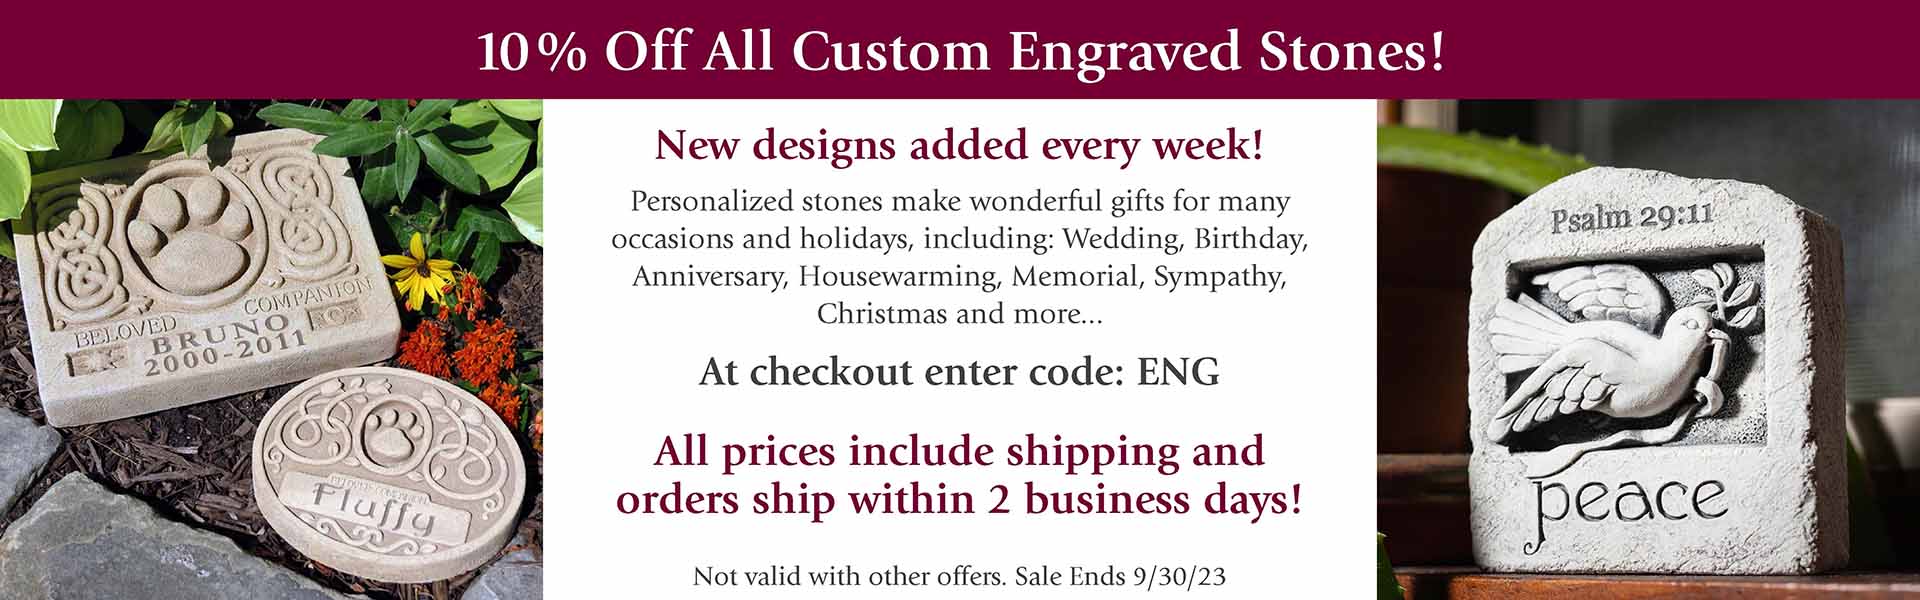 Engraved Stone Art 10% Off Sale